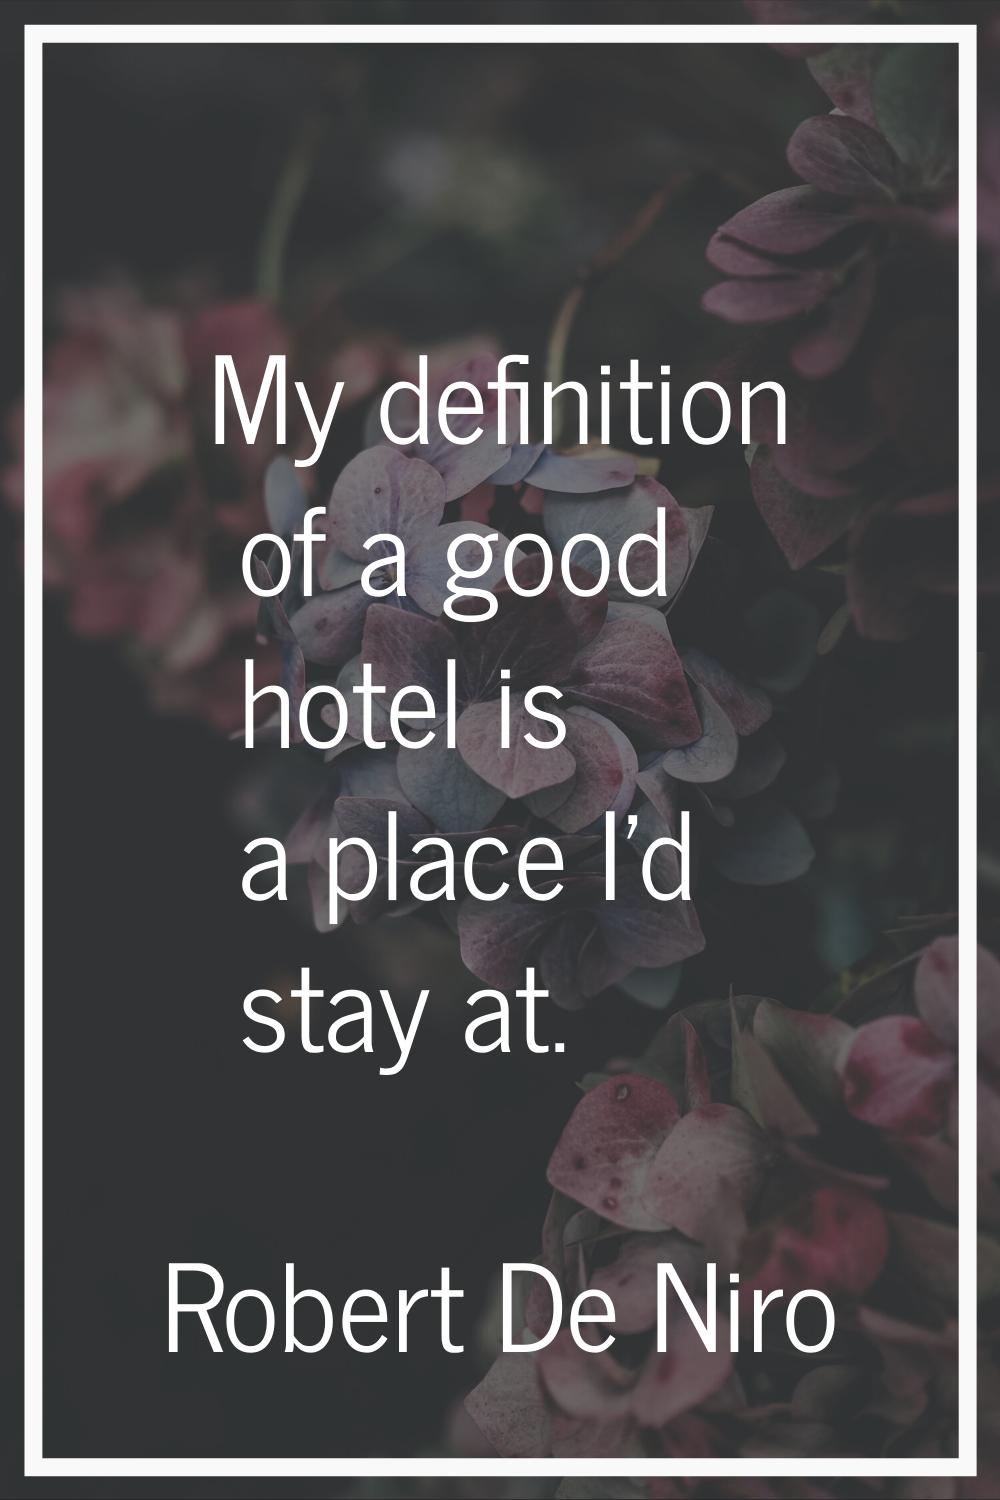 My definition of a good hotel is a place I'd stay at.